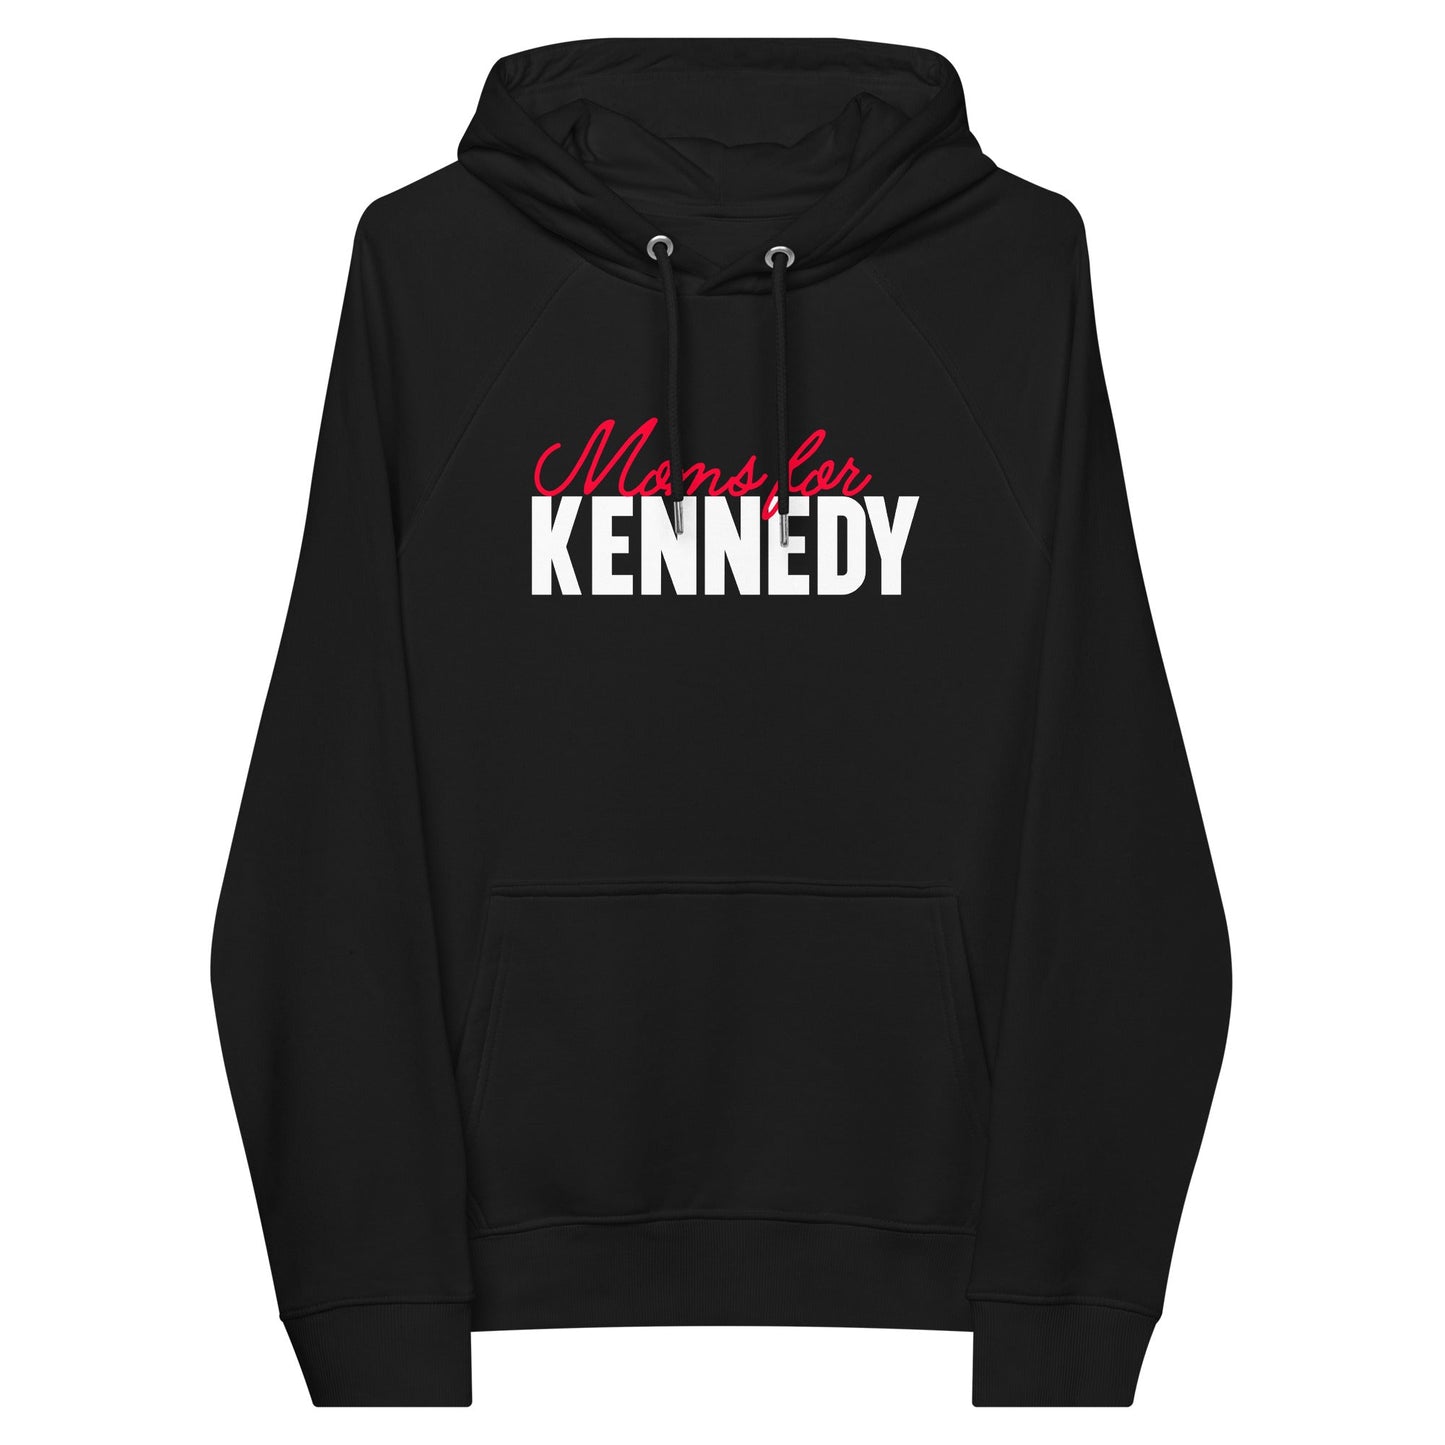 Moms for Kennedy Unisex Hoodie - TEAM KENNEDY. All rights reserved